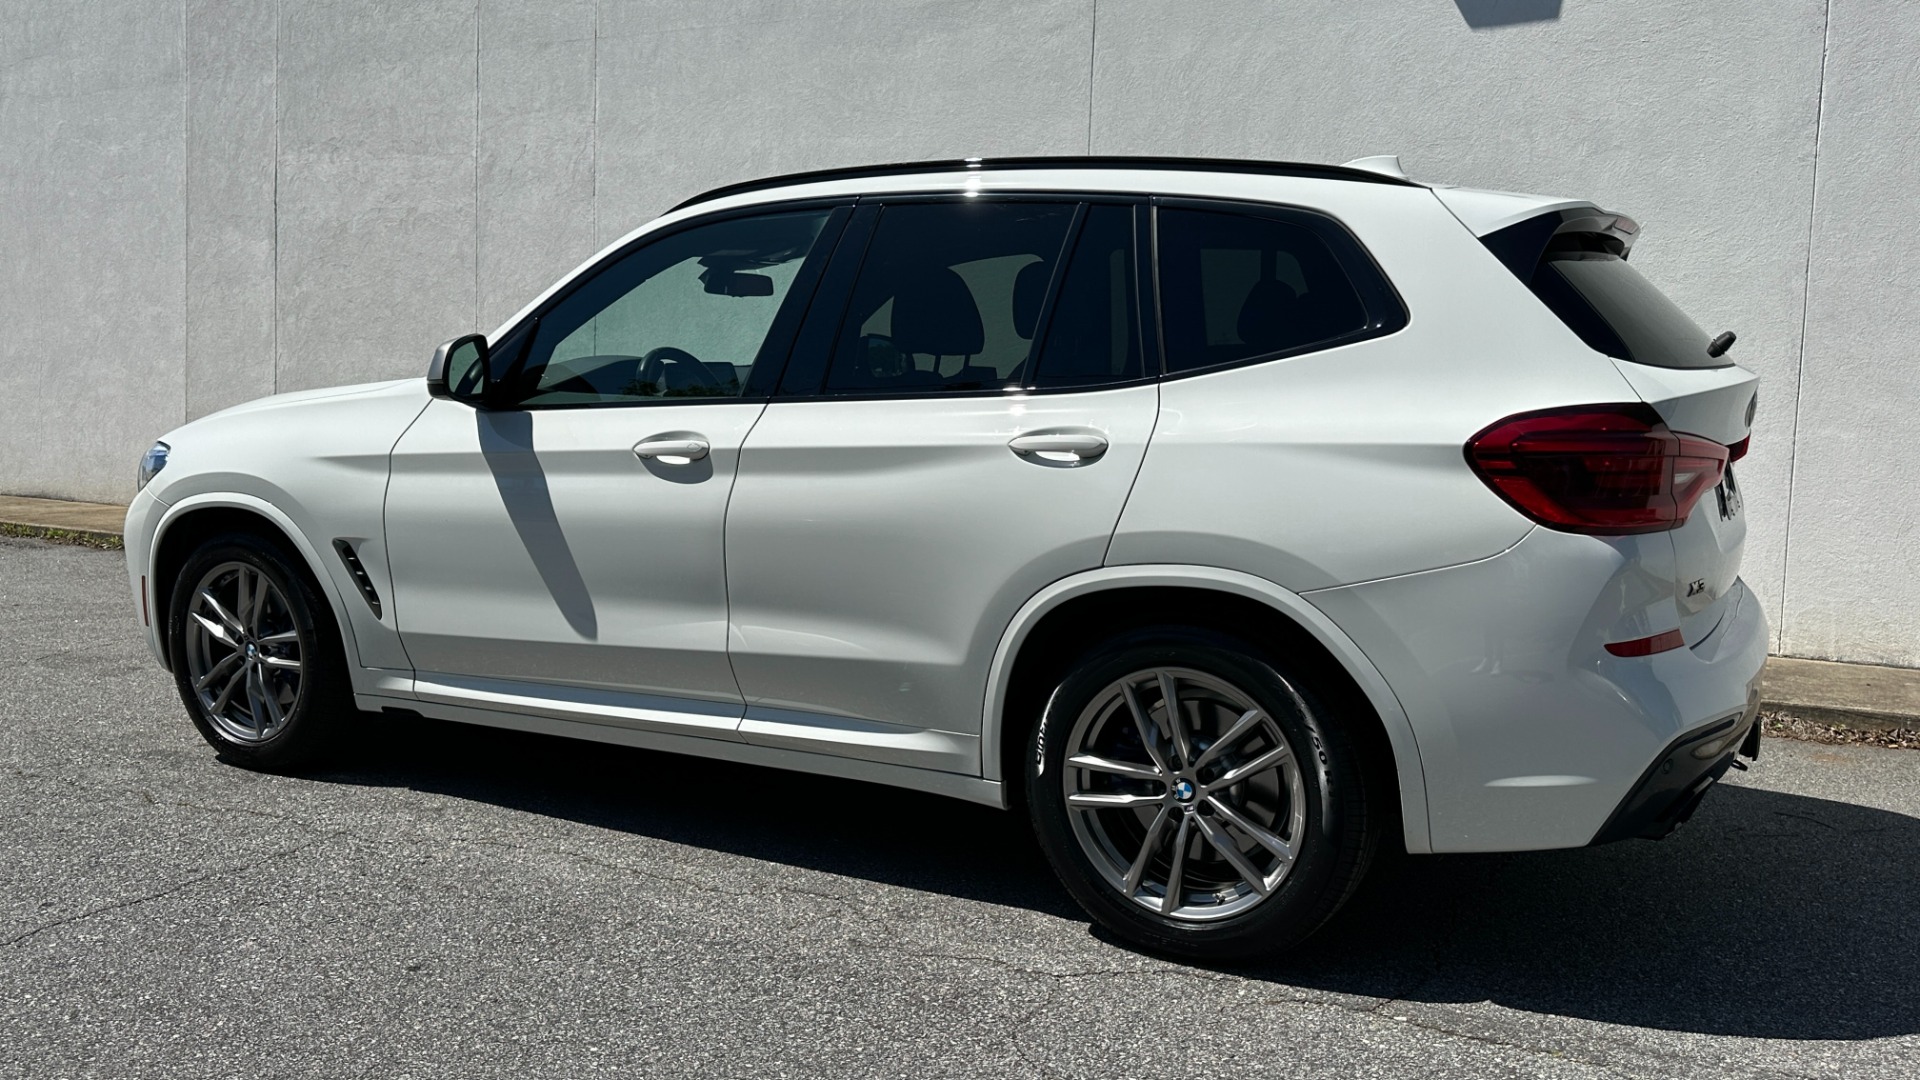 Used 2021 BMW X3 M40i / TRAILER HITCH / REAR VIEW CAMERA / STORAGE PKG / GALVANIC CONTROLS for sale $50,495 at Formula Imports in Charlotte NC 28227 4